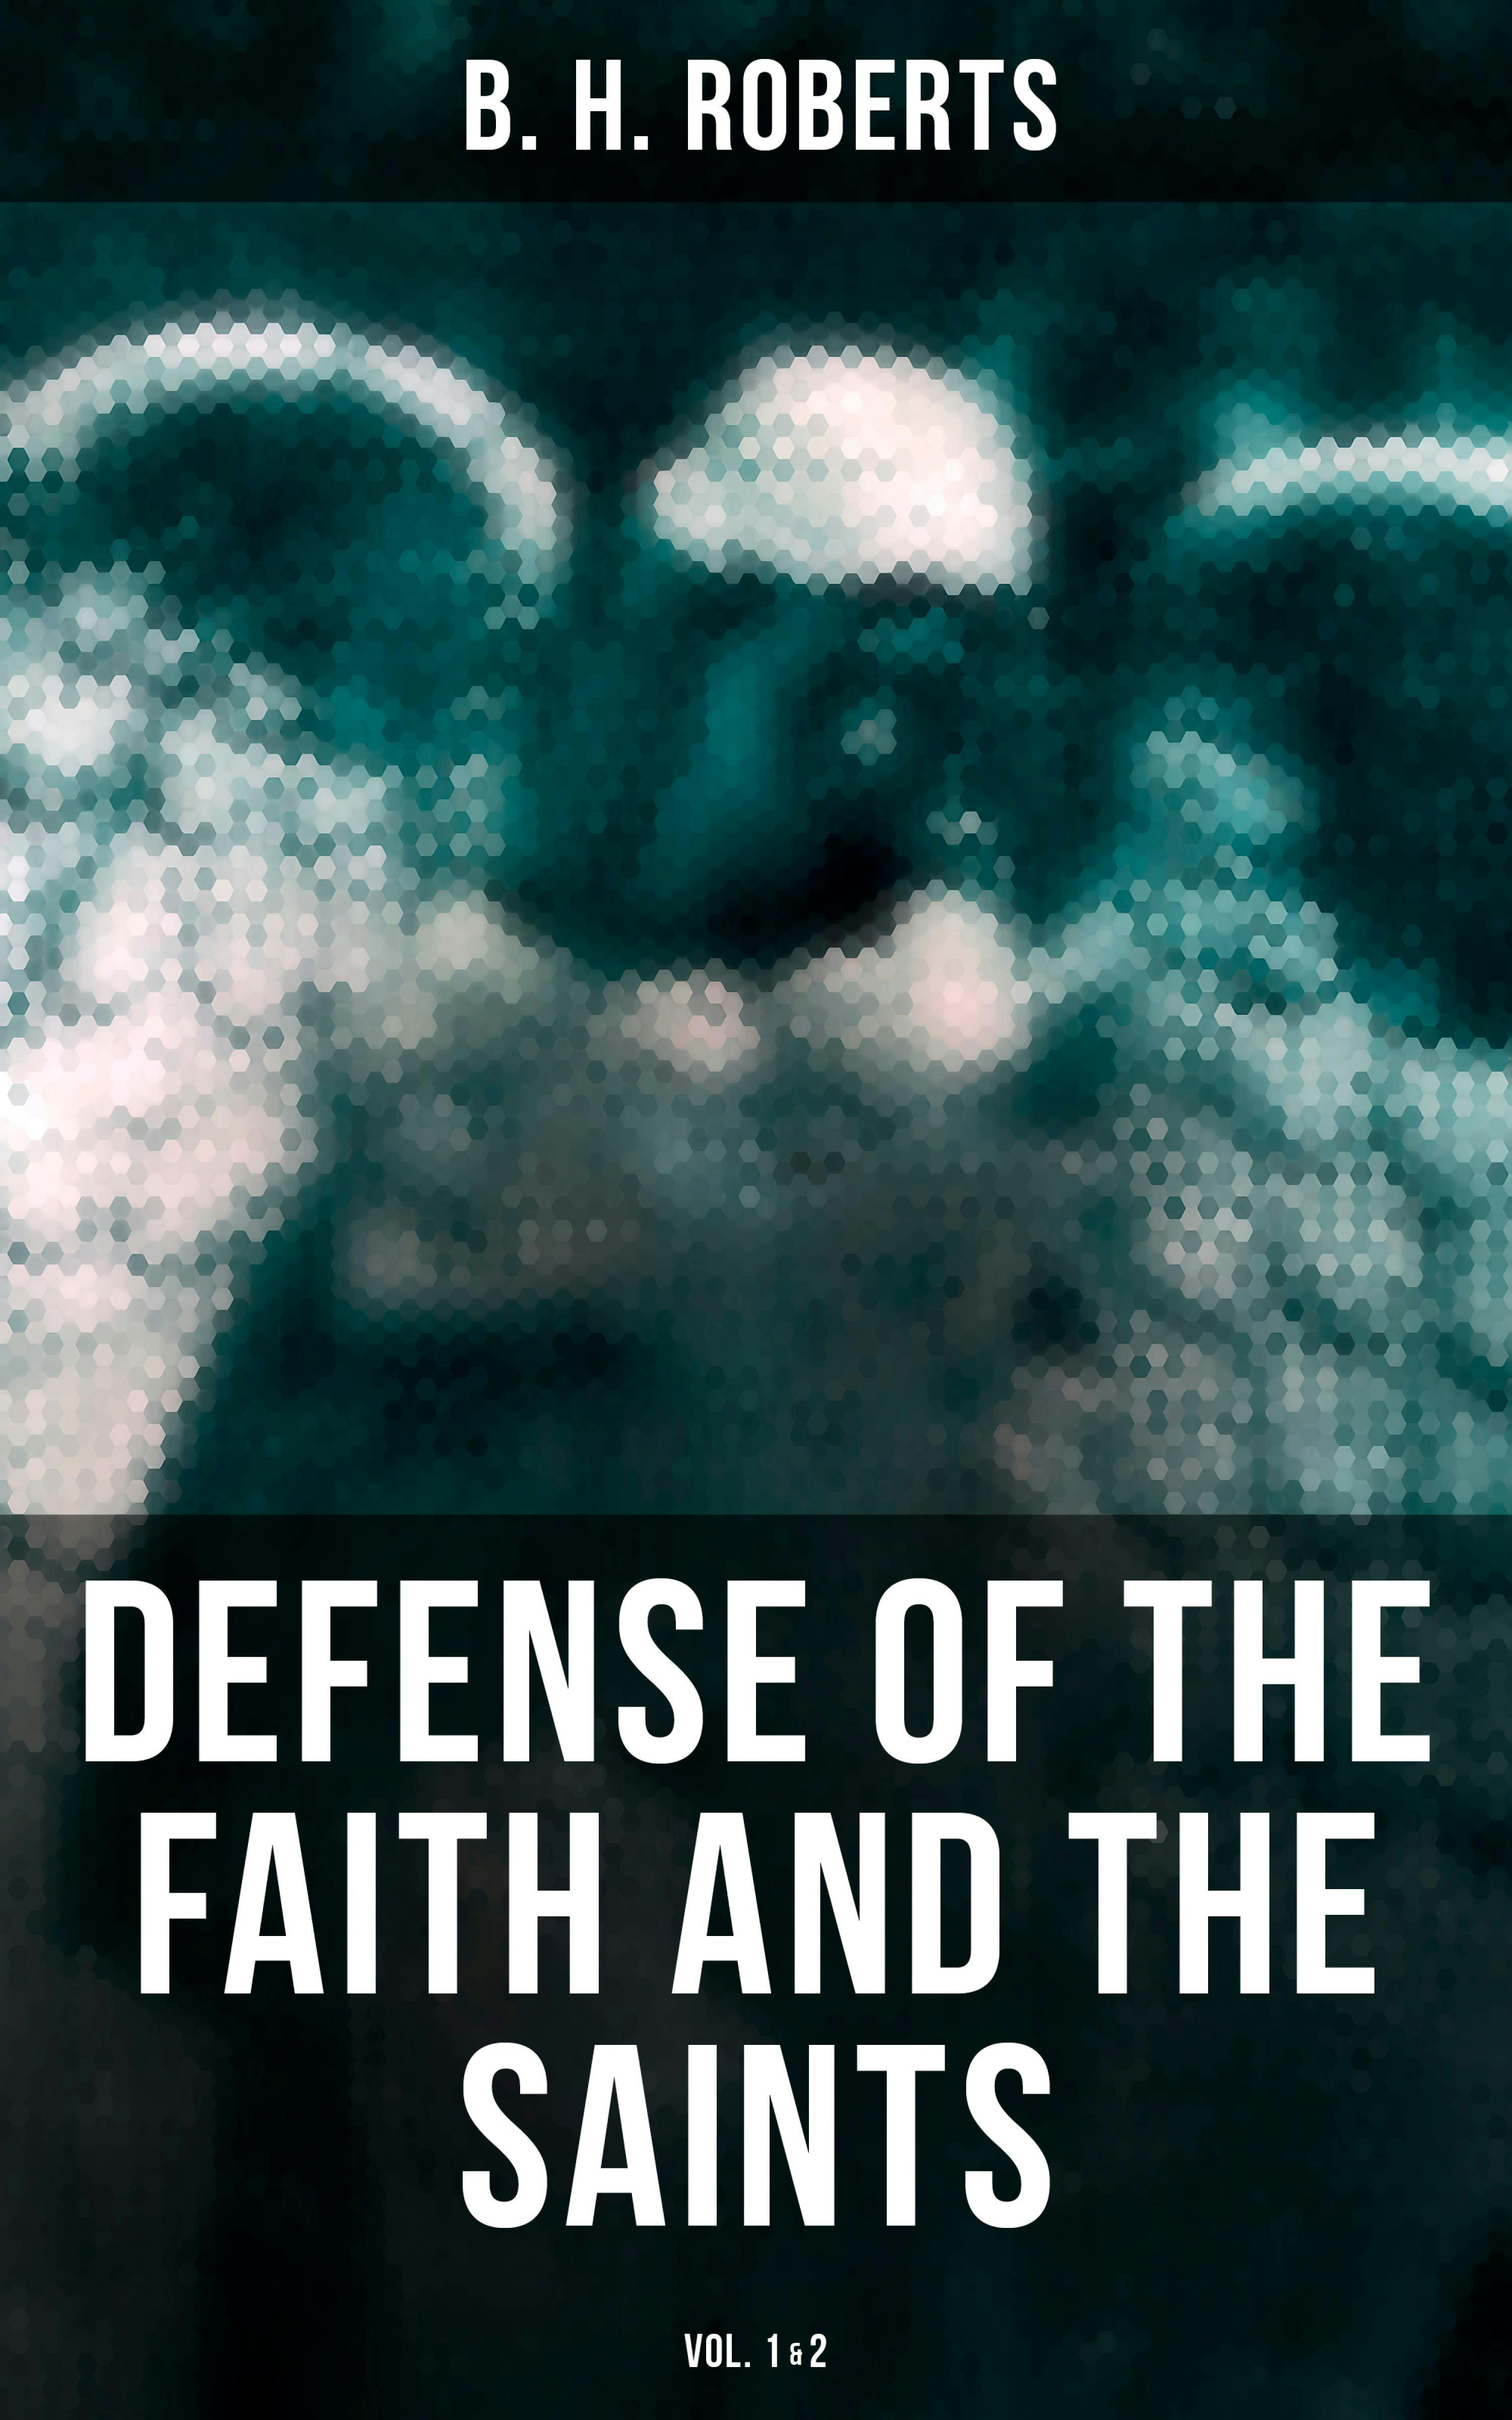 Defense of the Faith and the Saints (Vol.1&2) - B. H. Roberts